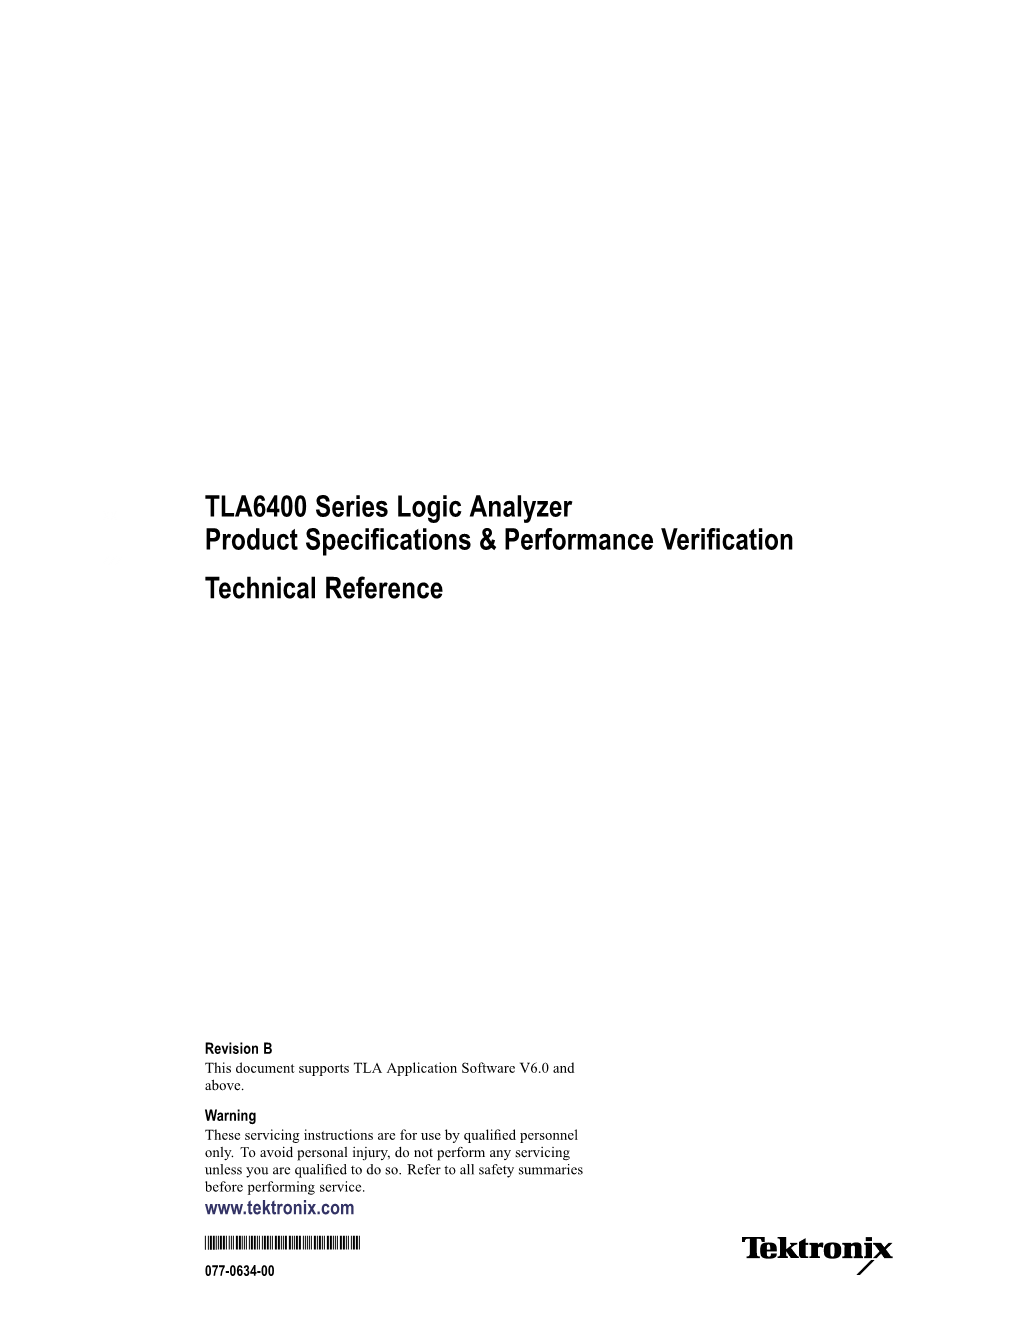 TLA6400 Series Logic Analyzer Product Specifications